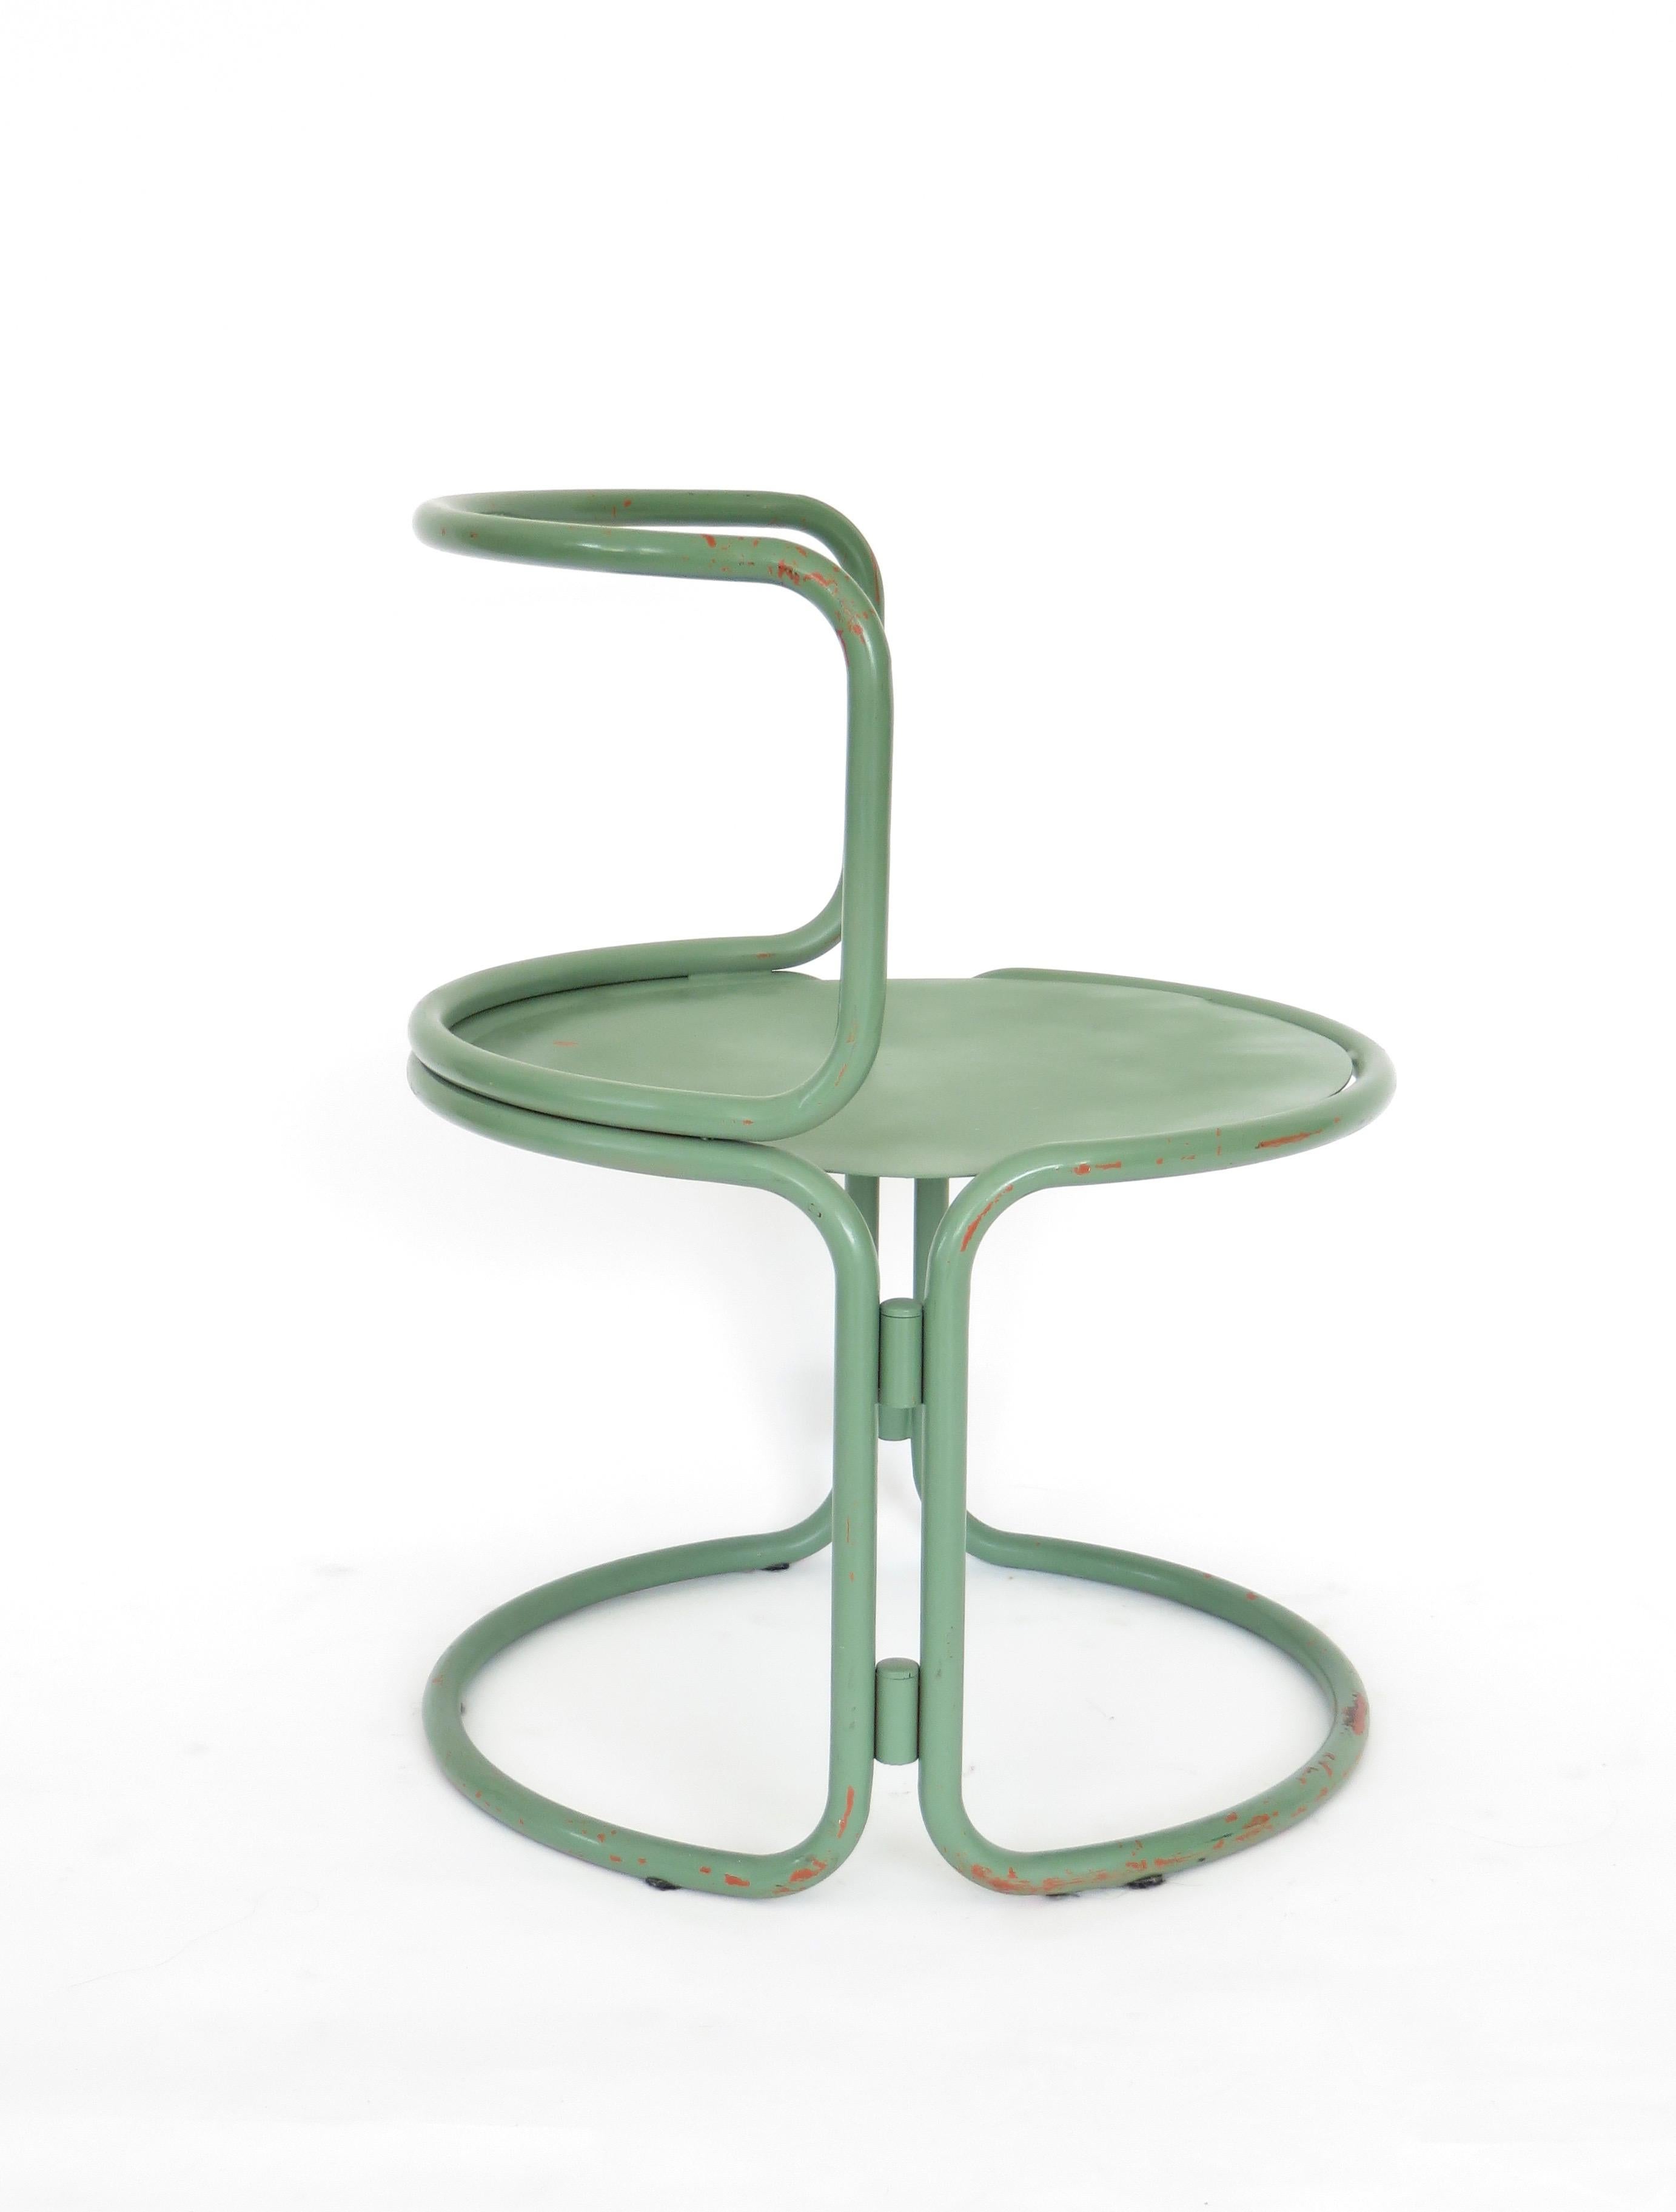 Tubular metal painted green side chair attributed to the Italian architect Gae Aulenti in the style of or a variation of the Locus Solus Chair. Traces of orange paint under the green paint. 
Originally designed in 1963.
Overall size: 21.75